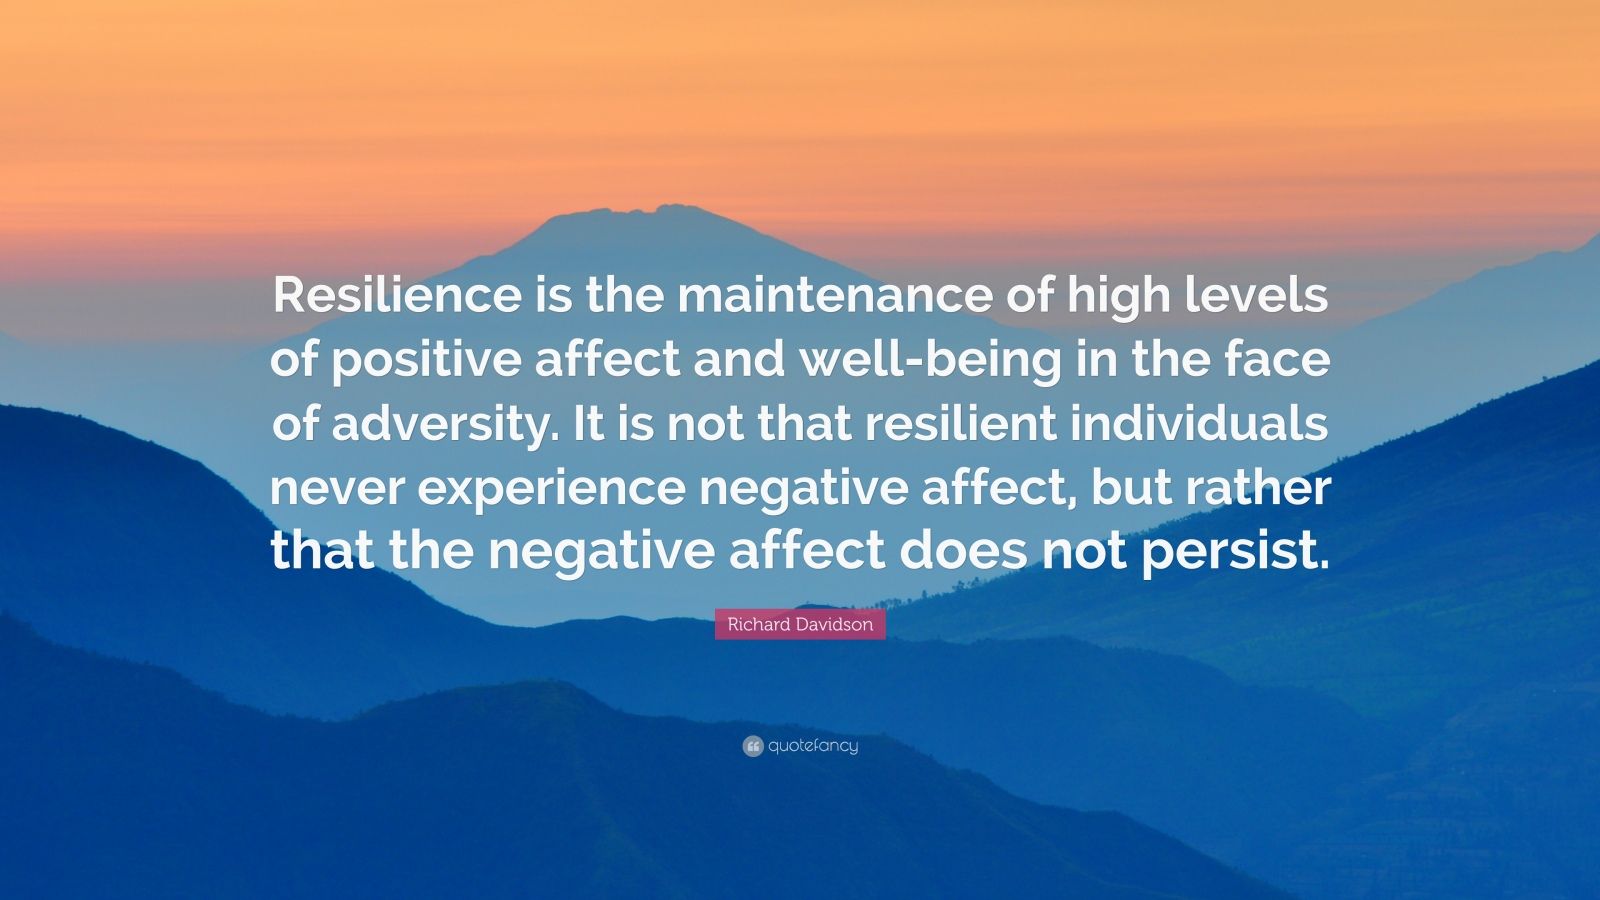 Richard Davidson Quote: “Resilience Is The Maintenance Of High Levels Of Positive Affect And Well Being In The Face Of Adversity. It Is Not That .”